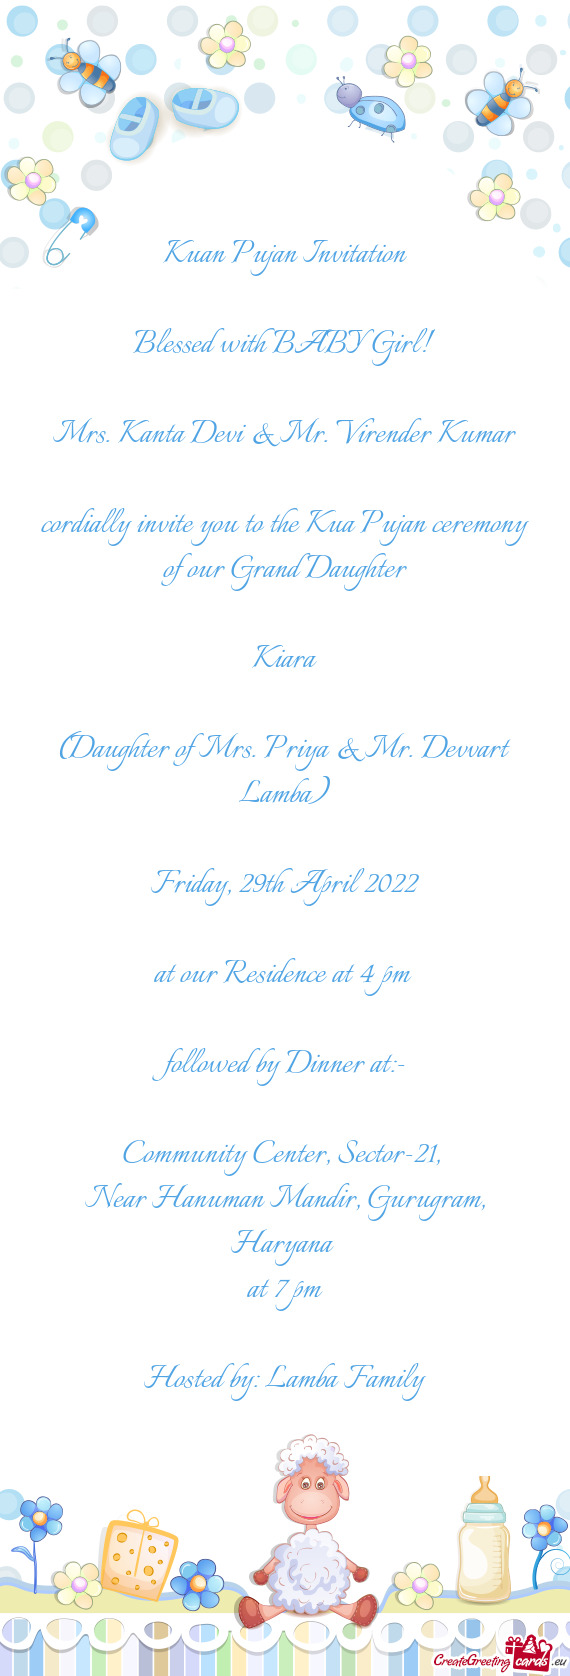 Cordially invite you to the Kua Pujan ceremony of our Grand Daughter